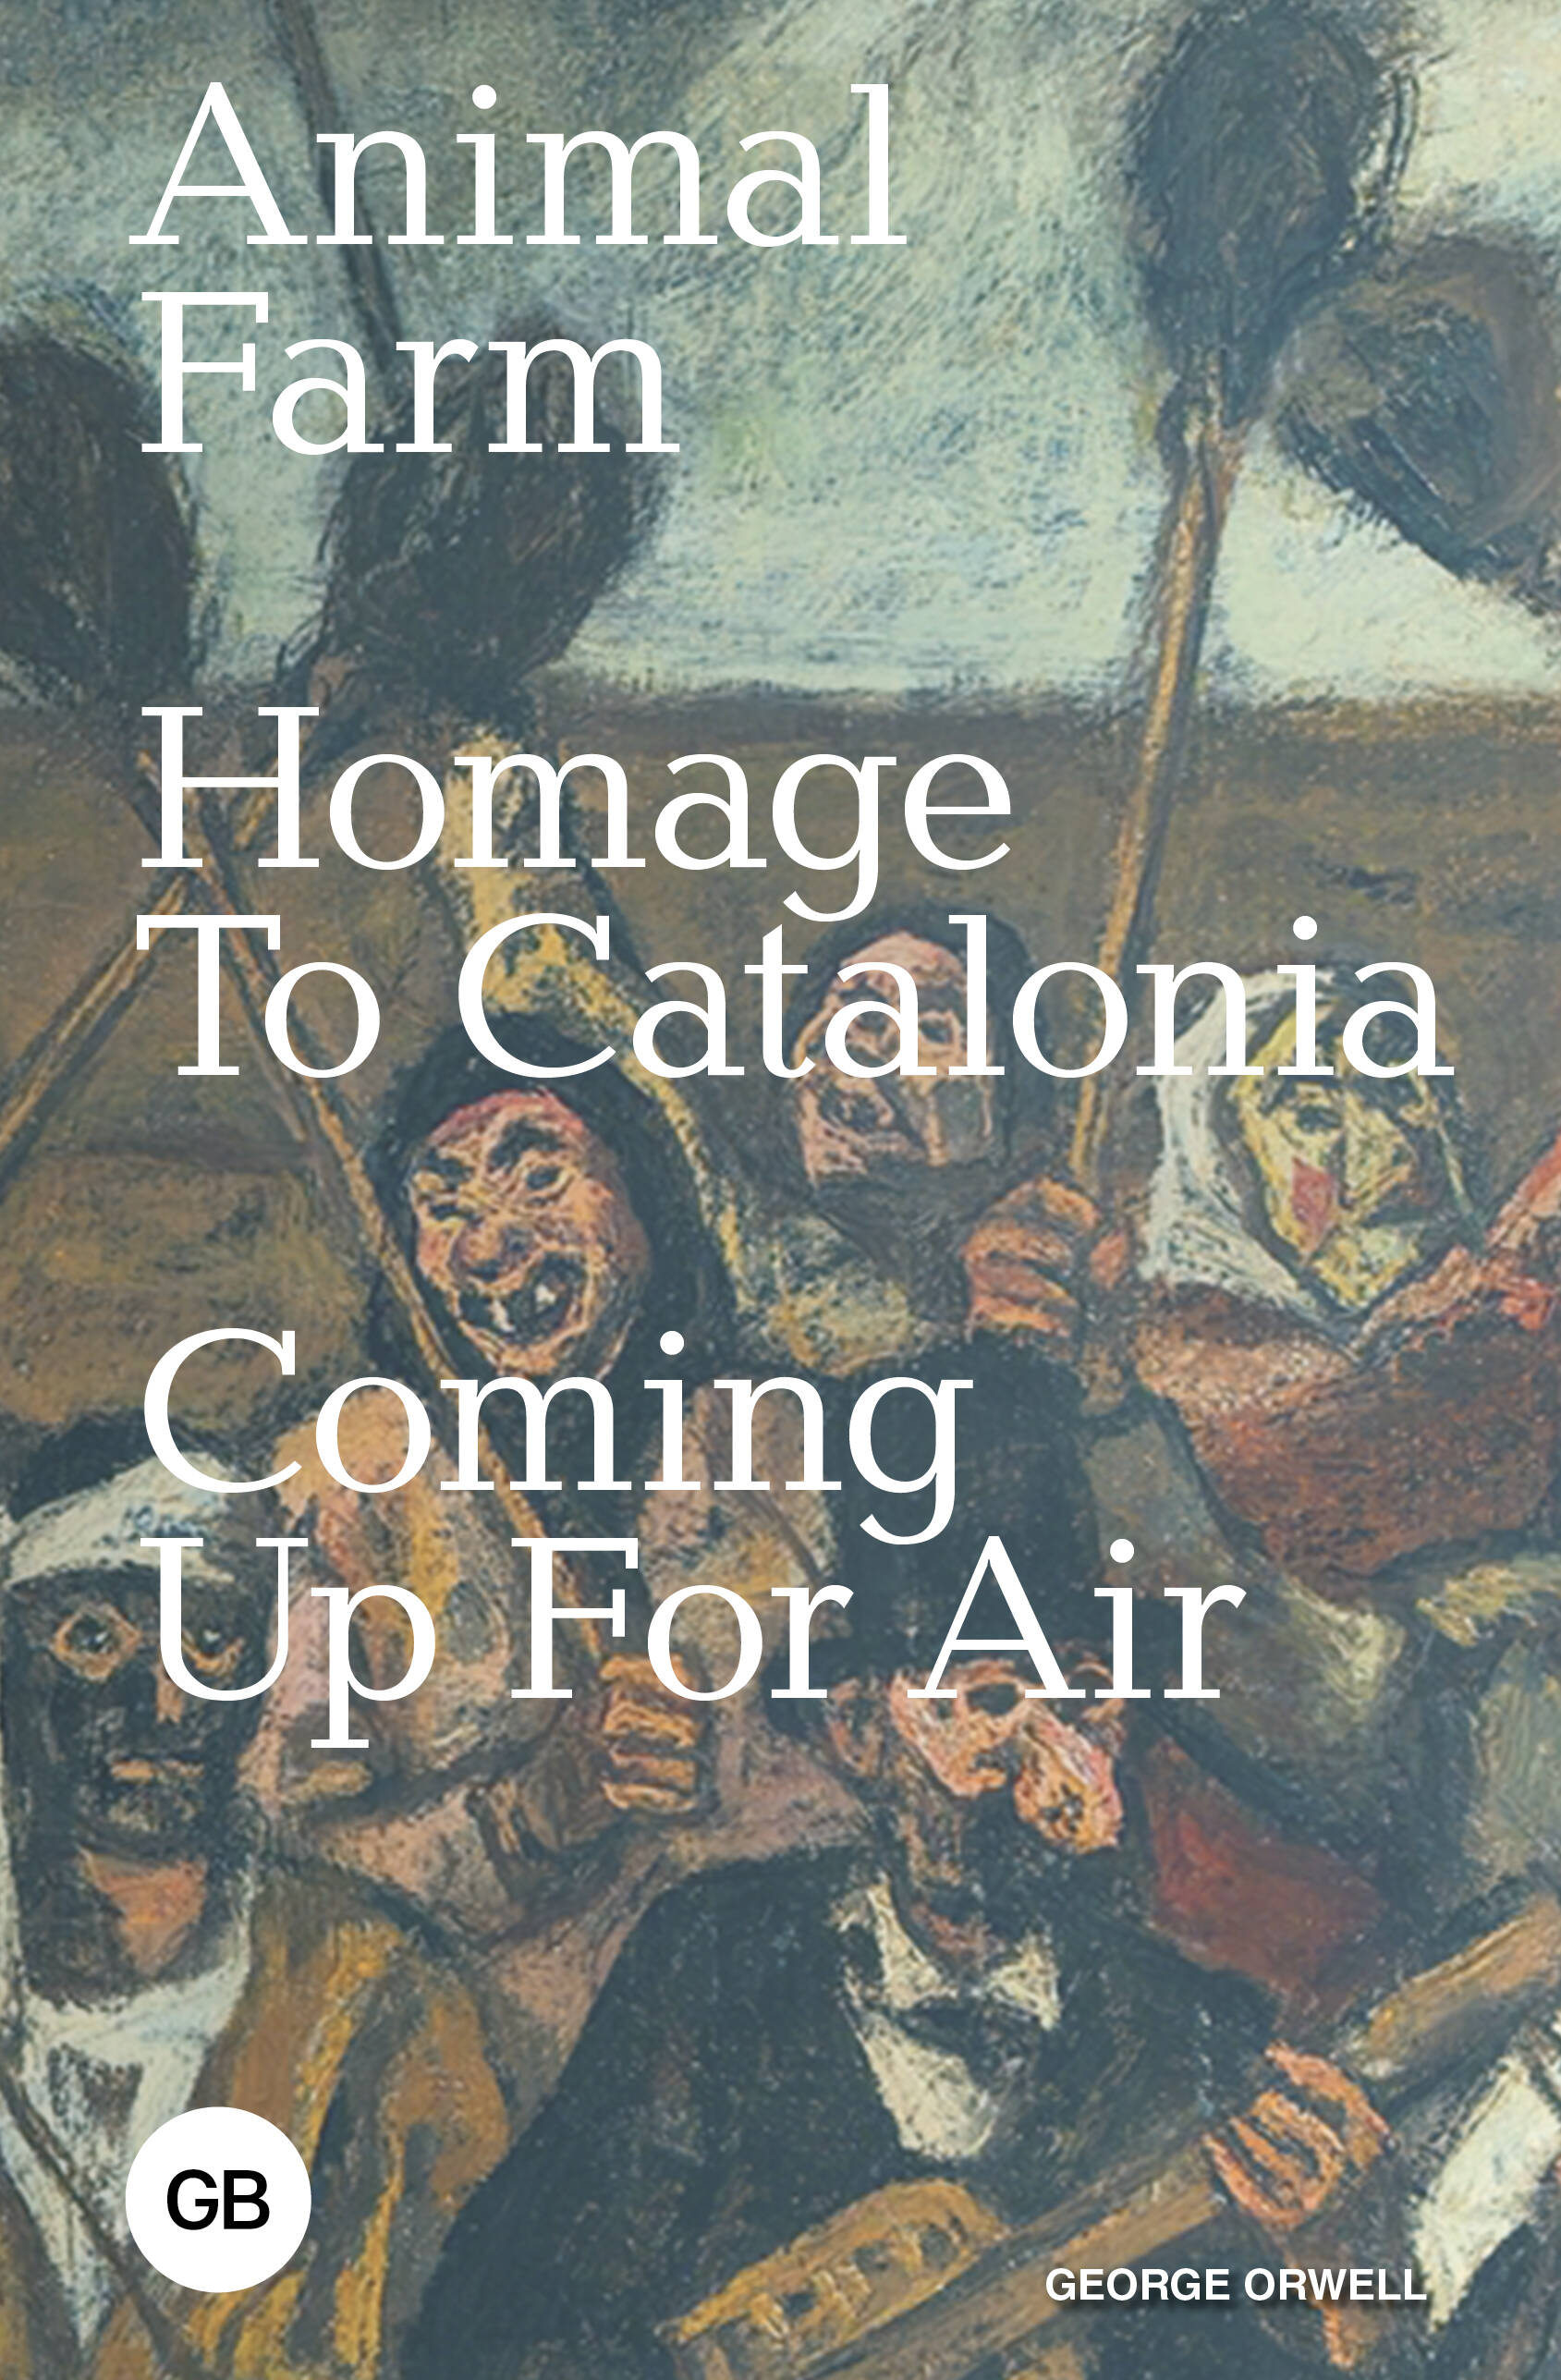 Animal Farm, Homage to Catalonia, Coming Up for Air